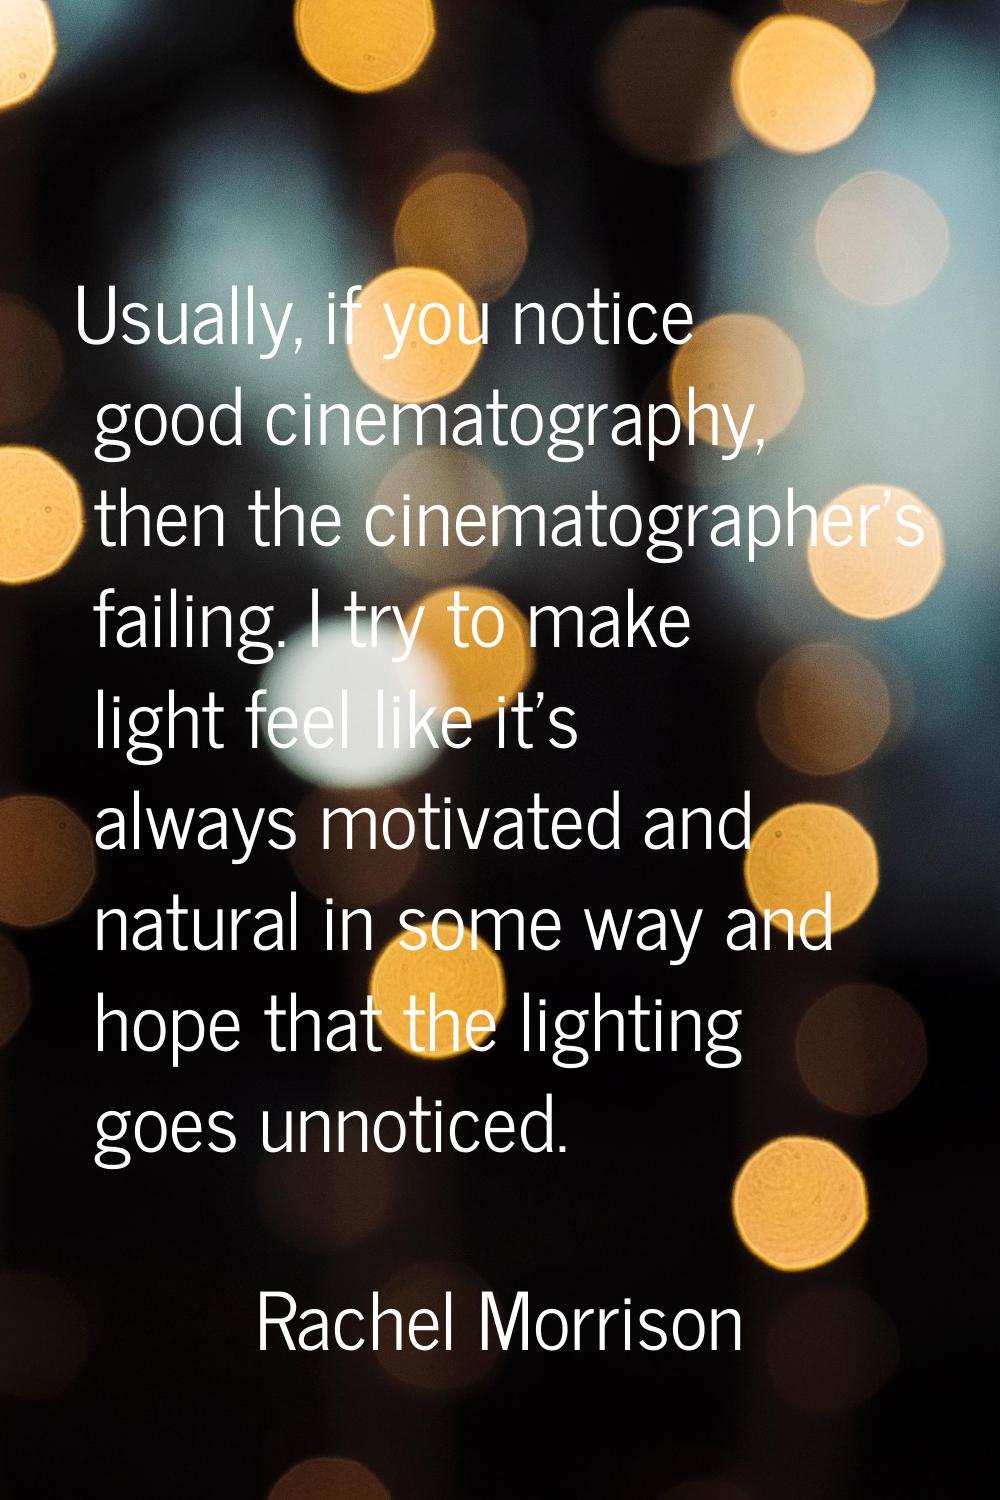 Usually, if you notice good cinematography, then the cinematographer's failing. I try to make light